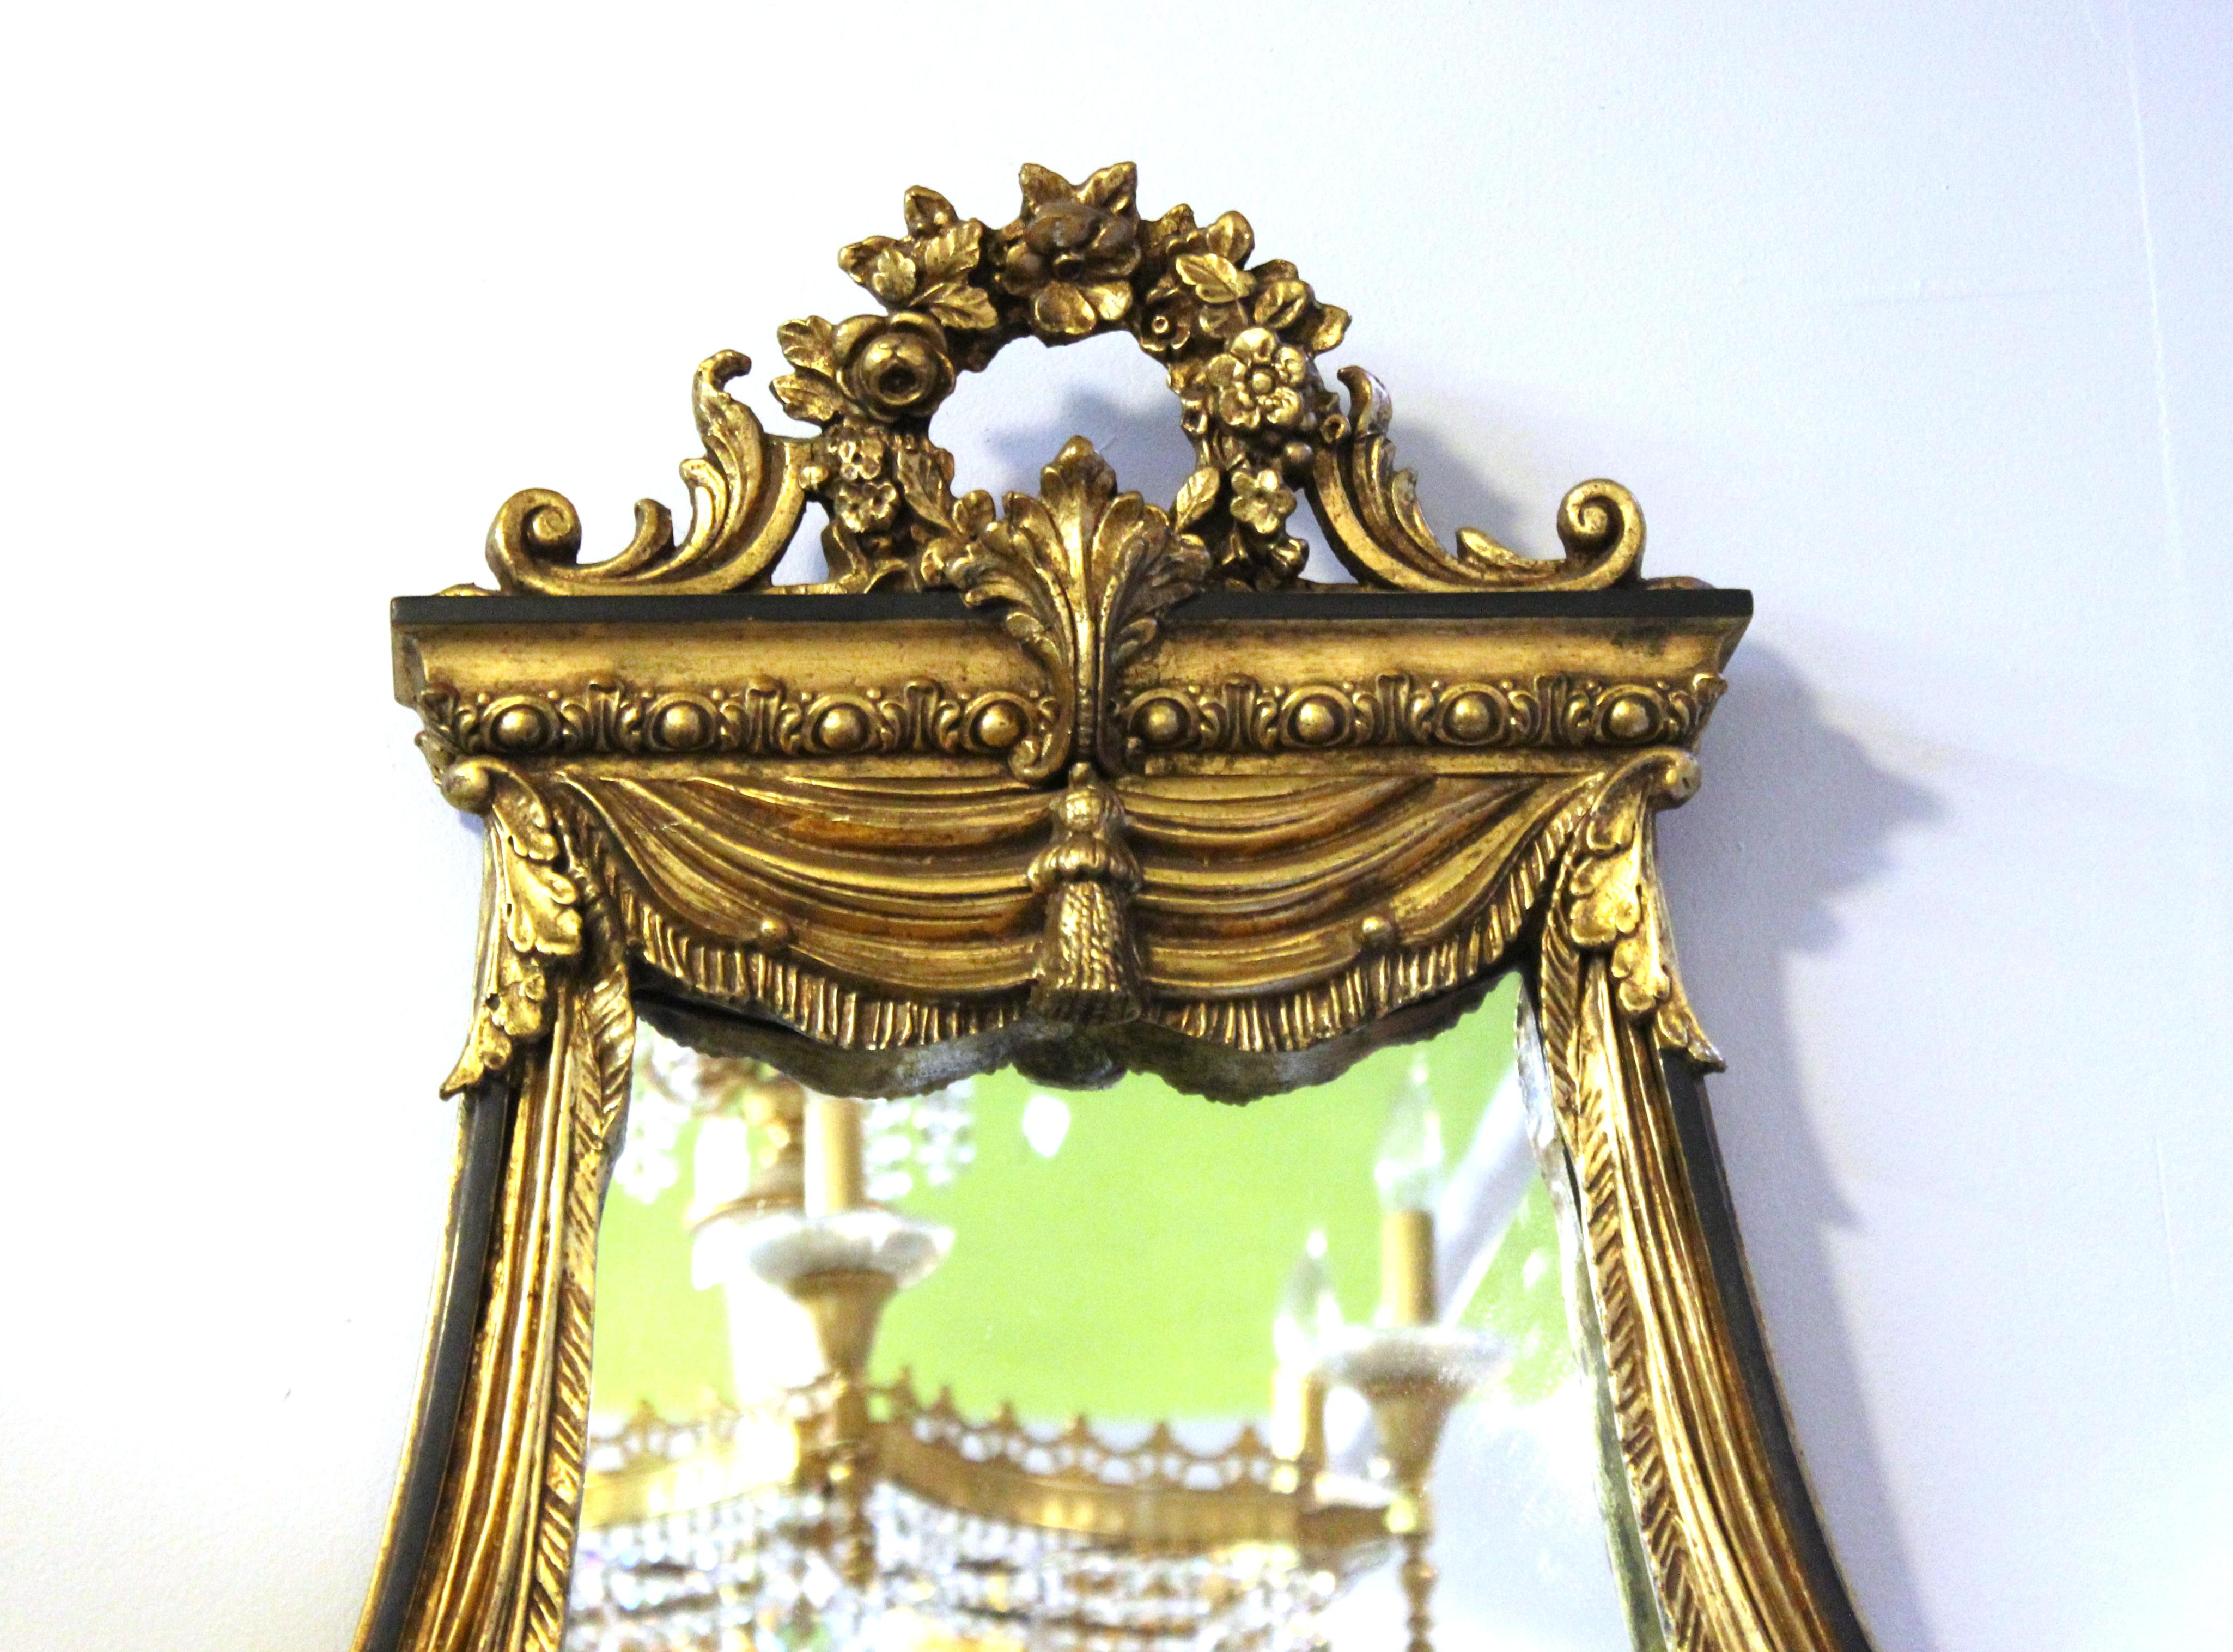 Neoclassical Revival style wall mirror in giltwood frame, with decorative drapery surmounted by a laurel reef and volutes. The piece has a label on the back from 'Decorative Arts Inc. New York' and is in great vintage condition with age-appropriate